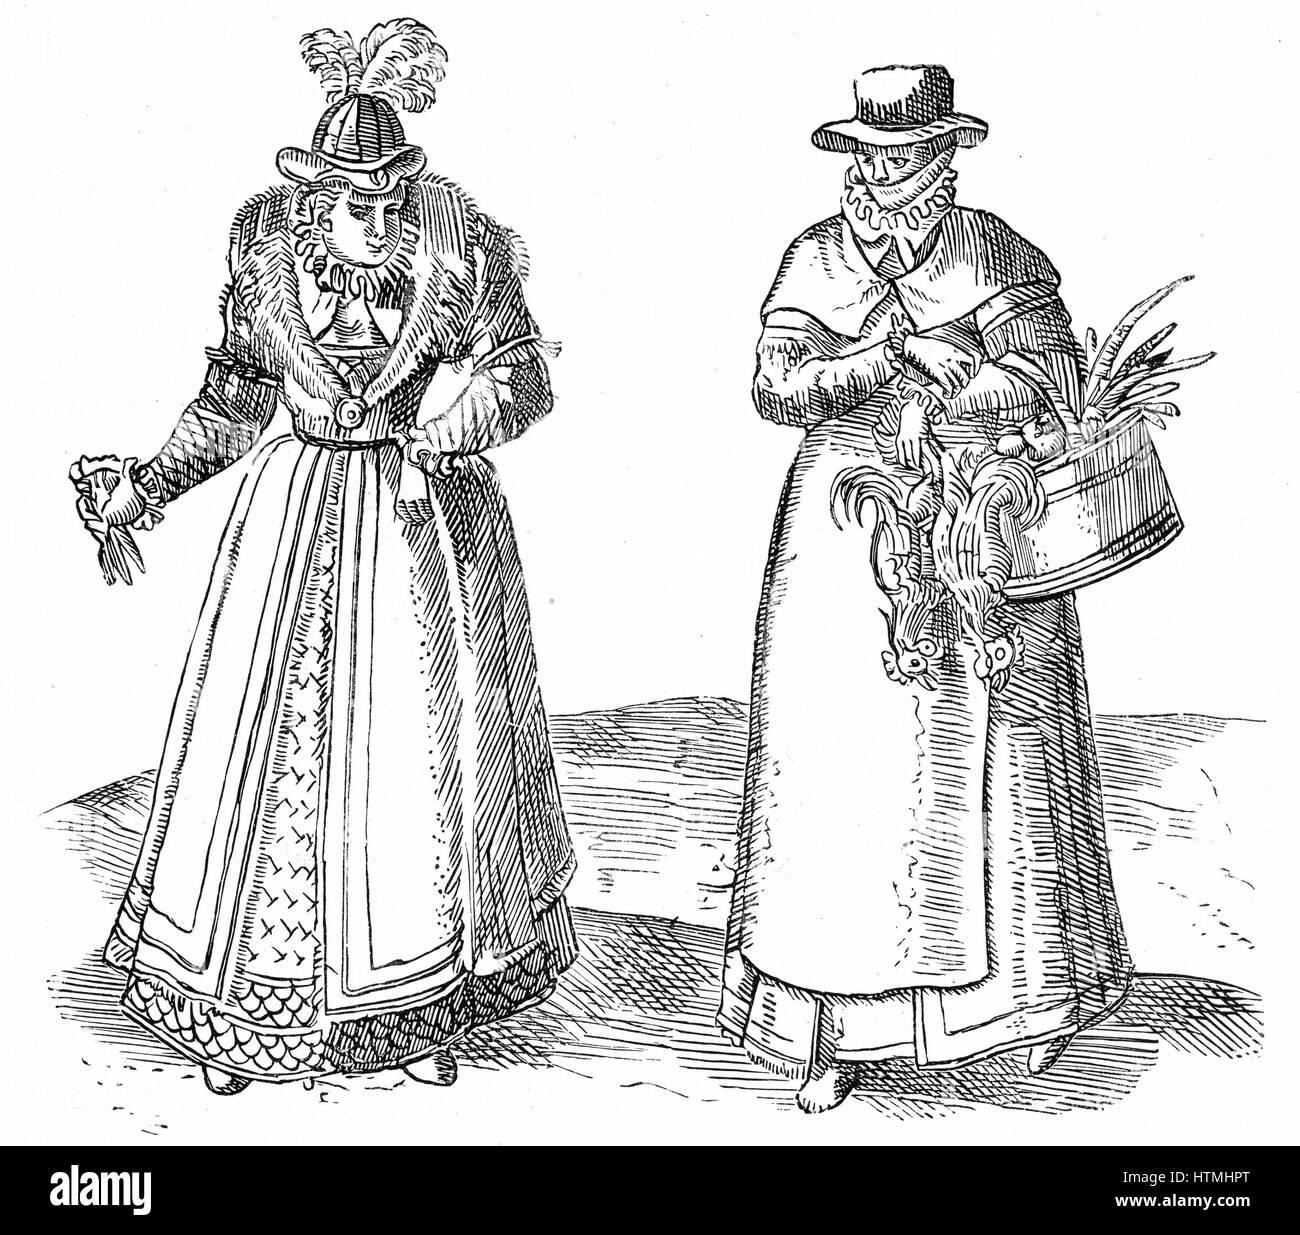 English countrywoman carrying basket of chickens and wearing apron over plain clothes (right). On left is a lady of the Court with fur-trimmed coat over embroidered dress. Sumptuary laws dictated what each caste of society could wear. Engraving from Braun Stock Photo